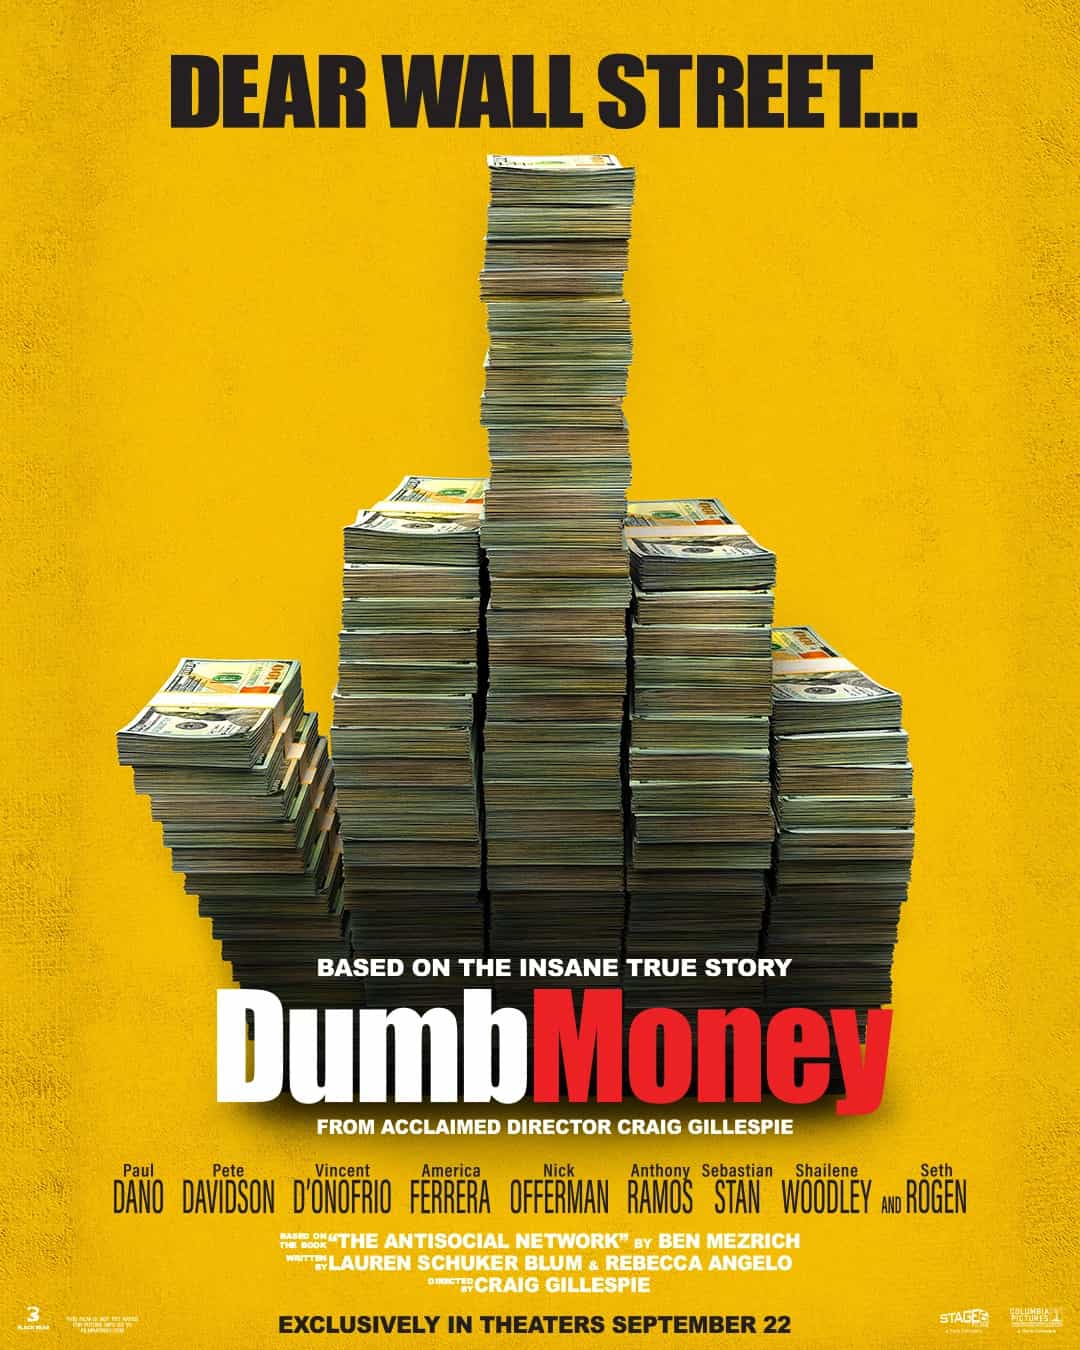 Dumb Money has been given a 15 age rating in the UK for strong language, sex references, drug misuse